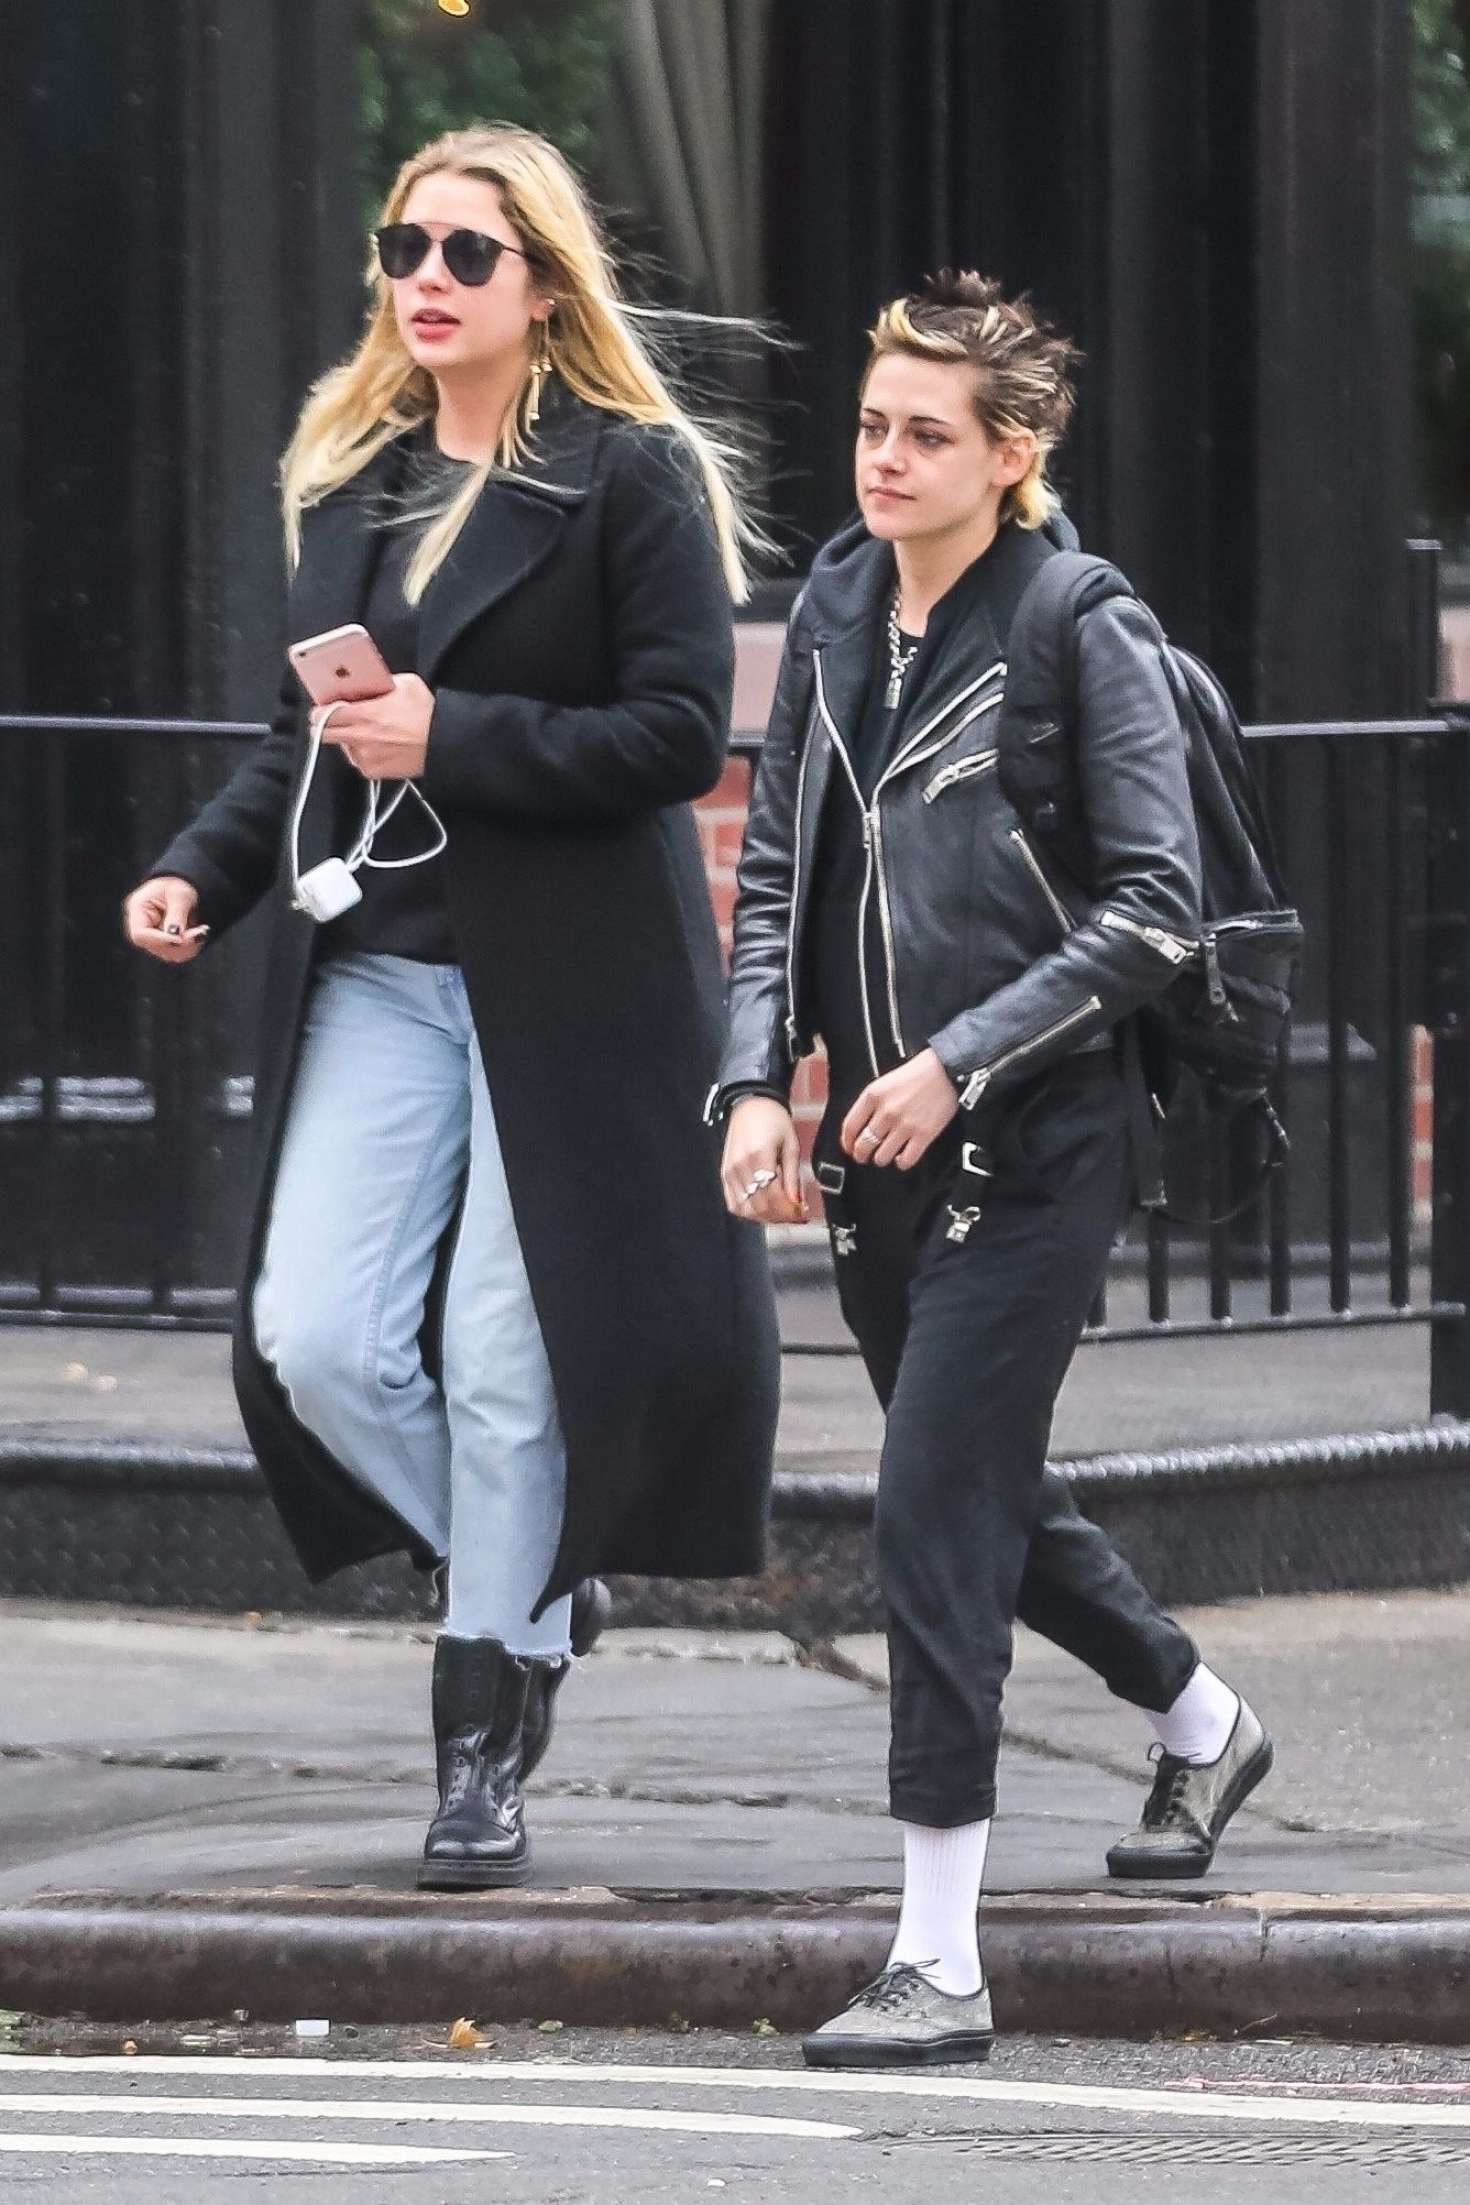 Ashley Benson and Kristen Stewart out together in NYC -18 | GotCeleb